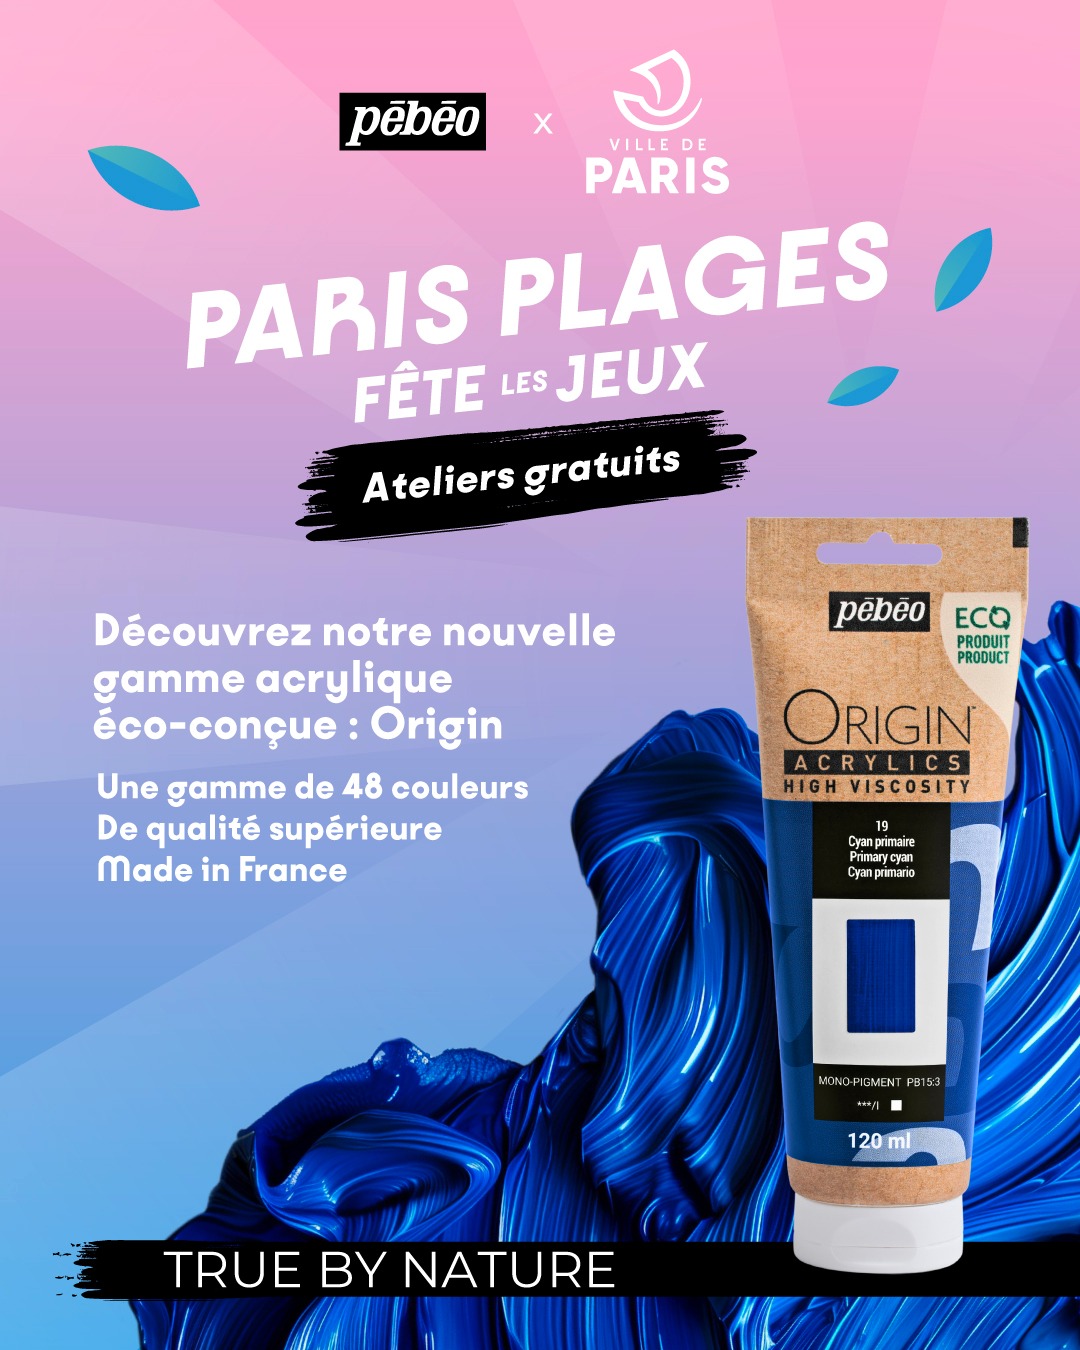 🎉Pébéo at Paris Plage🎉
During the 2024 Olympic Games this summer, Paris Plages makes its grand return, coinci...